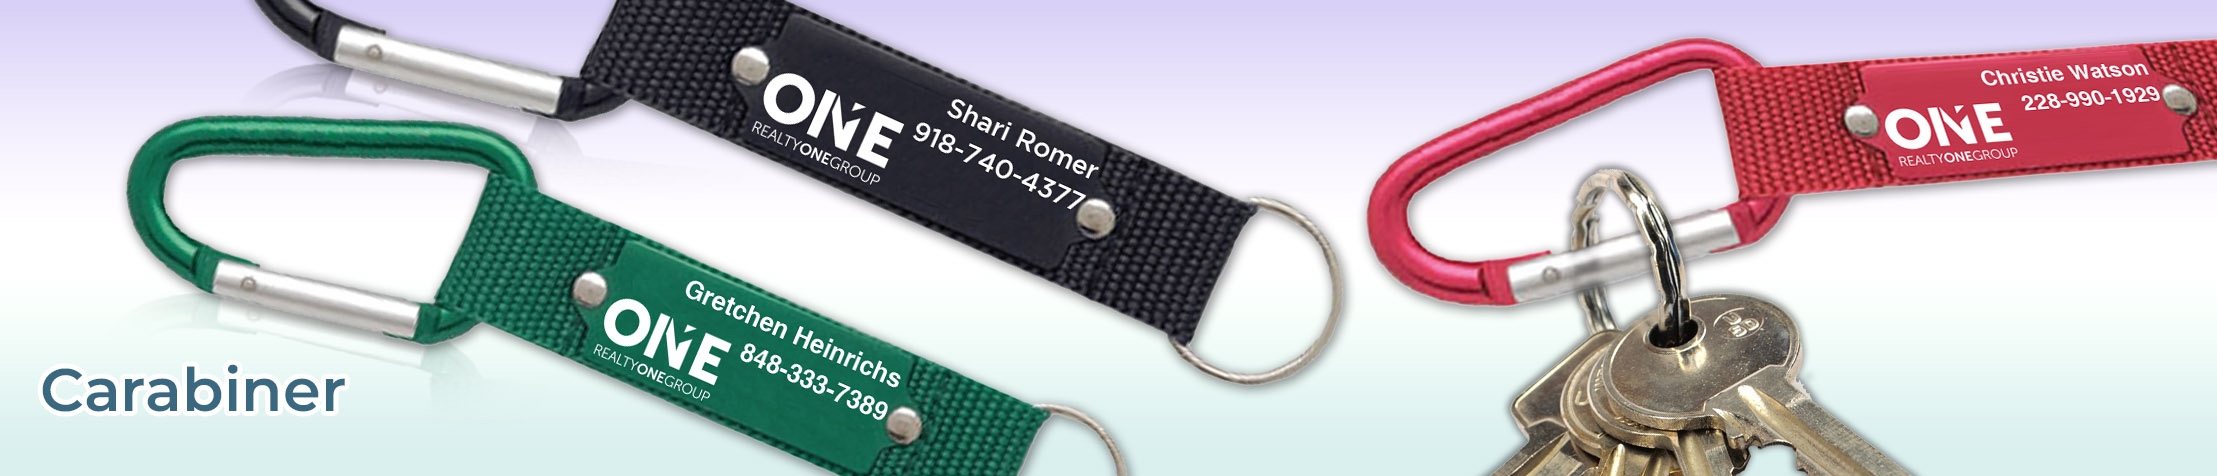 Realty One Group Real Estate Carabiner - Realty One Group  personalized realtor promotional products | BestPrintBuy.com